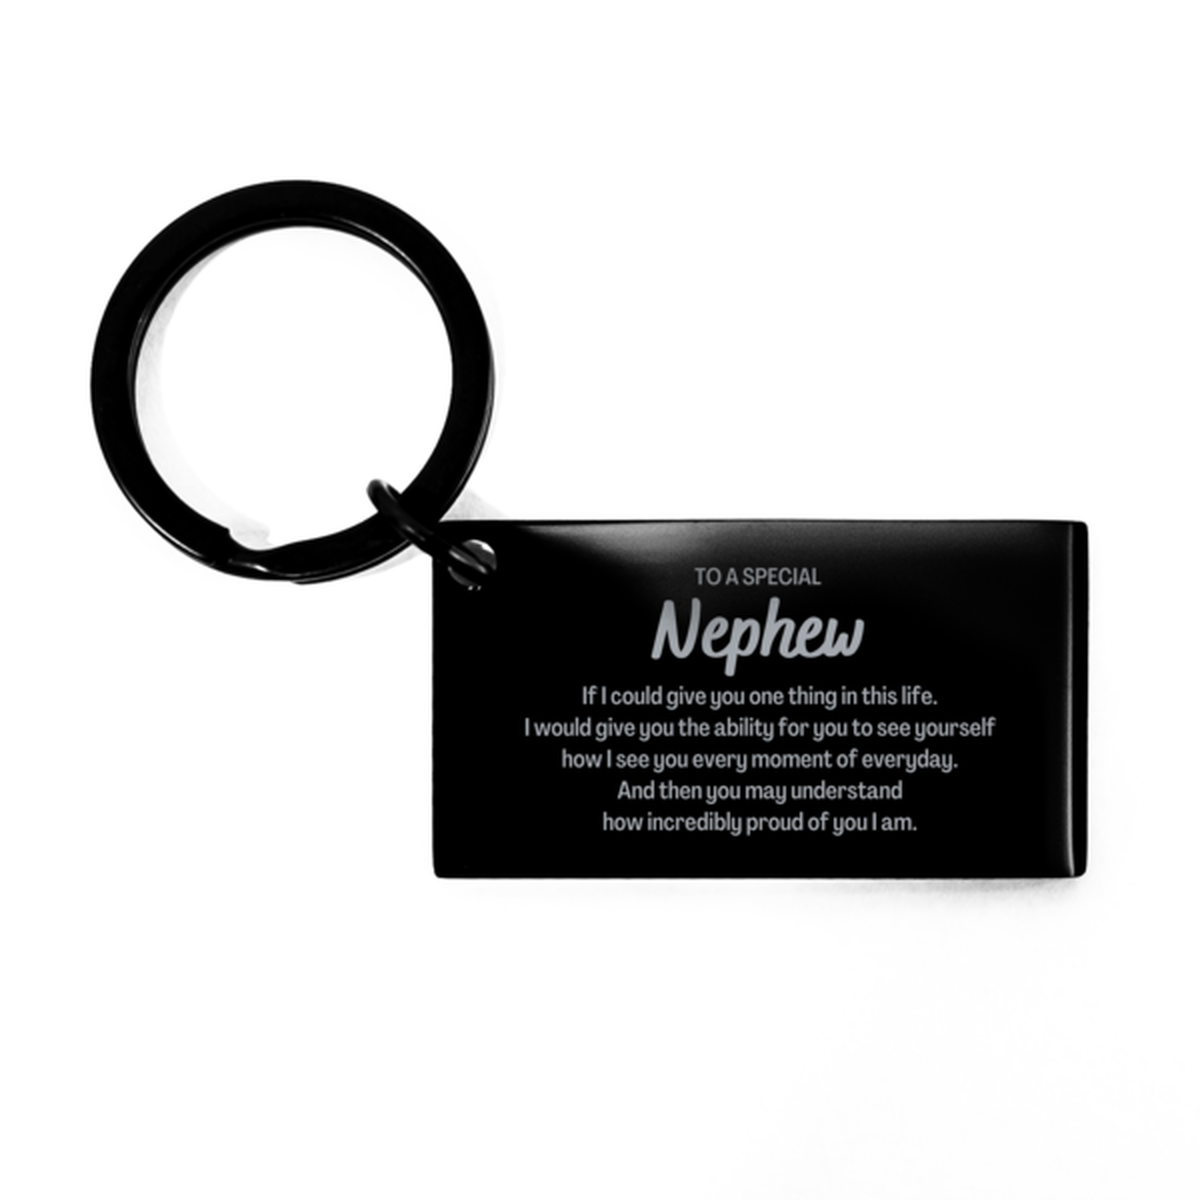 To My Nephew Keychain, Gifts For Nephew Engraved, Inspirational Gifts for Christmas Birthday, Epic Gifts for Nephew To A Special Nephew how incredibly proud of you I am